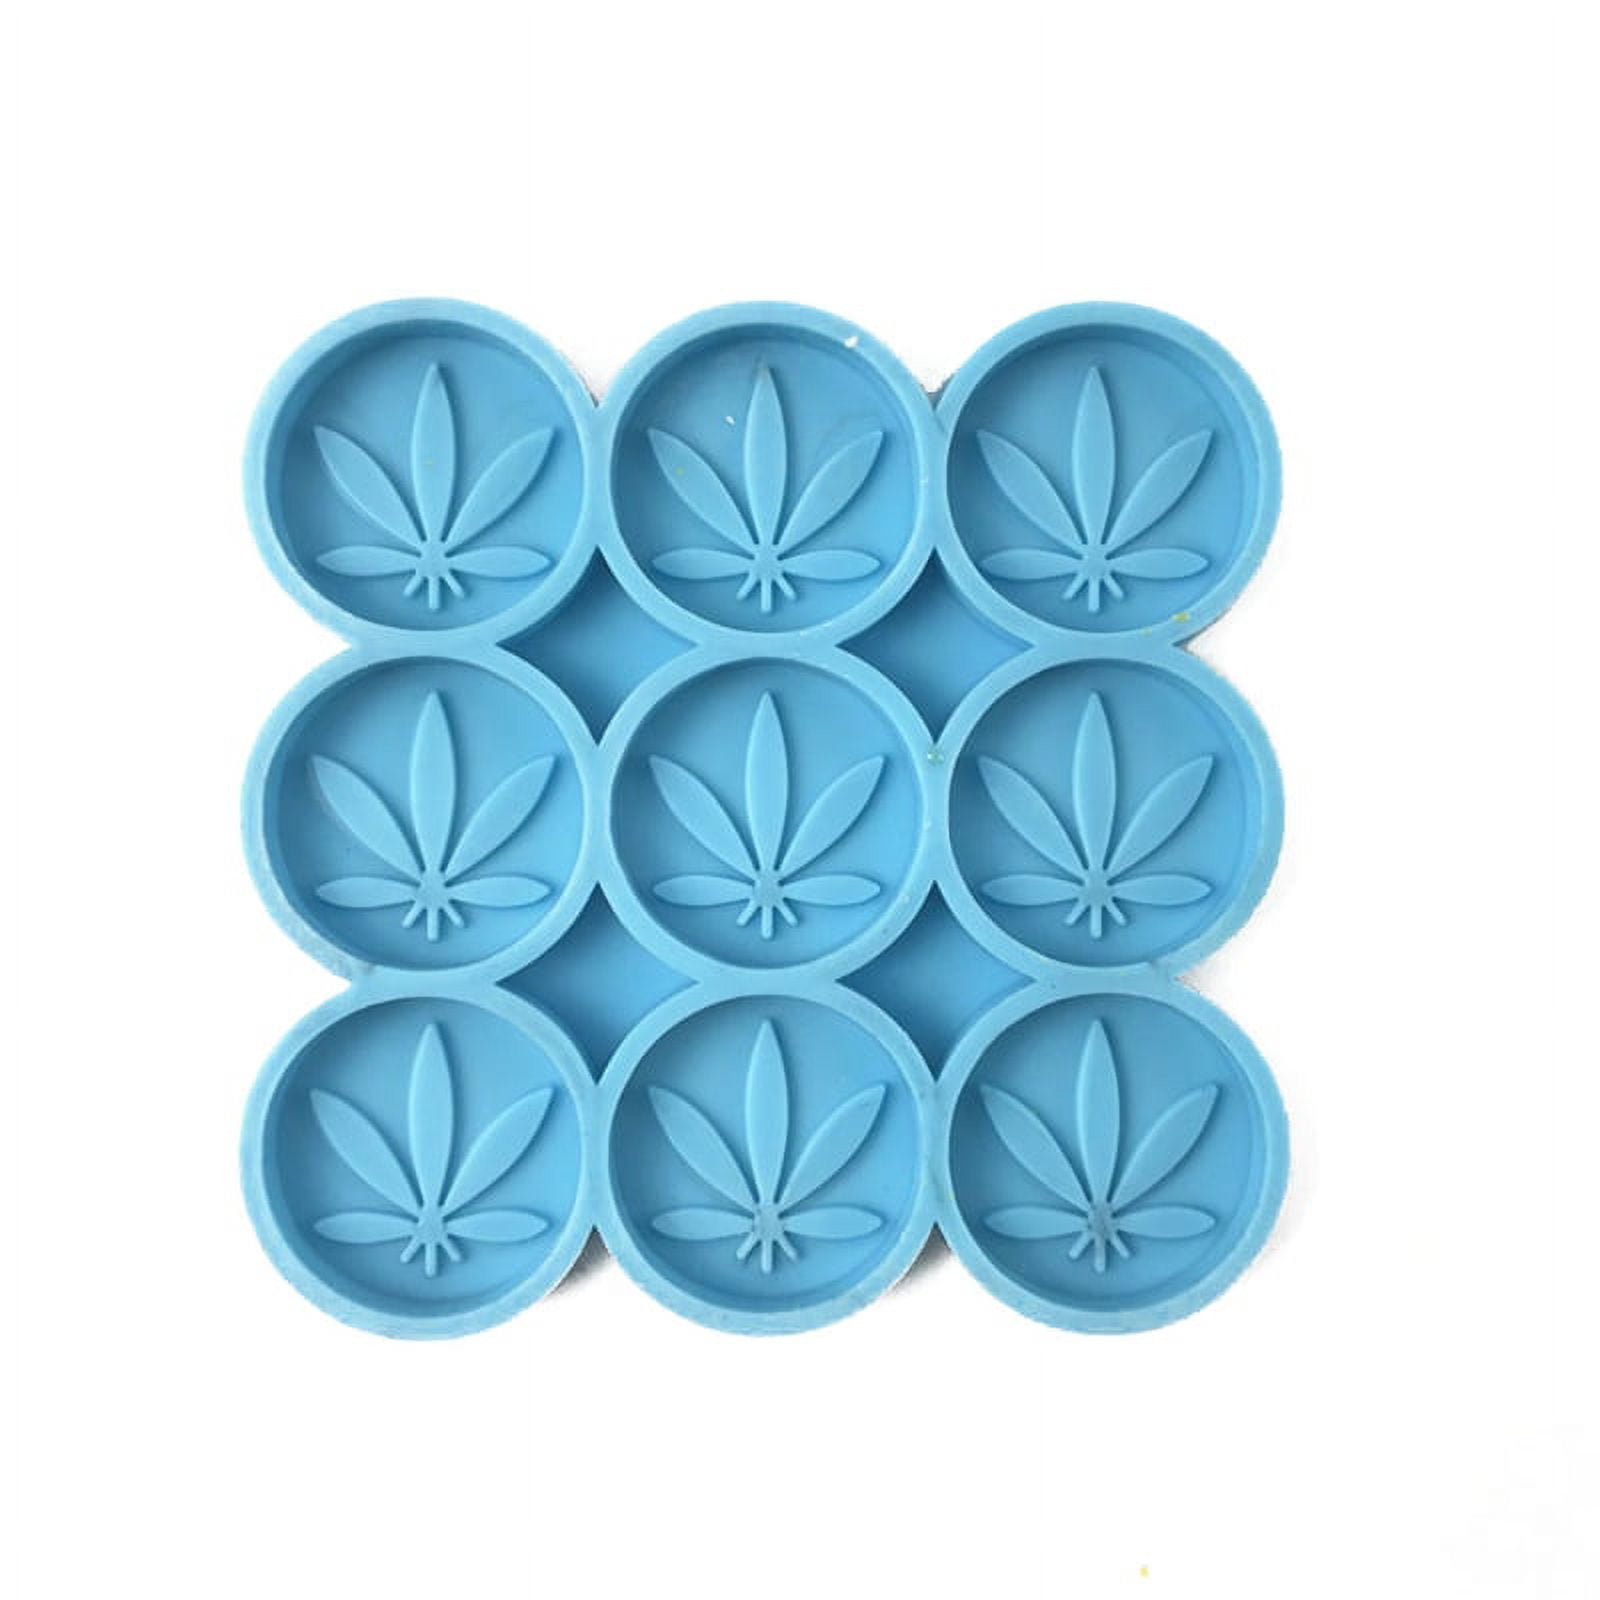 6 PCS Silicone Molds for Resin - Large Resin Molds with Rolling Tray Mold  and Resin Grinder Mold for Grind and Storage, DIY Resin Epoxy Kit